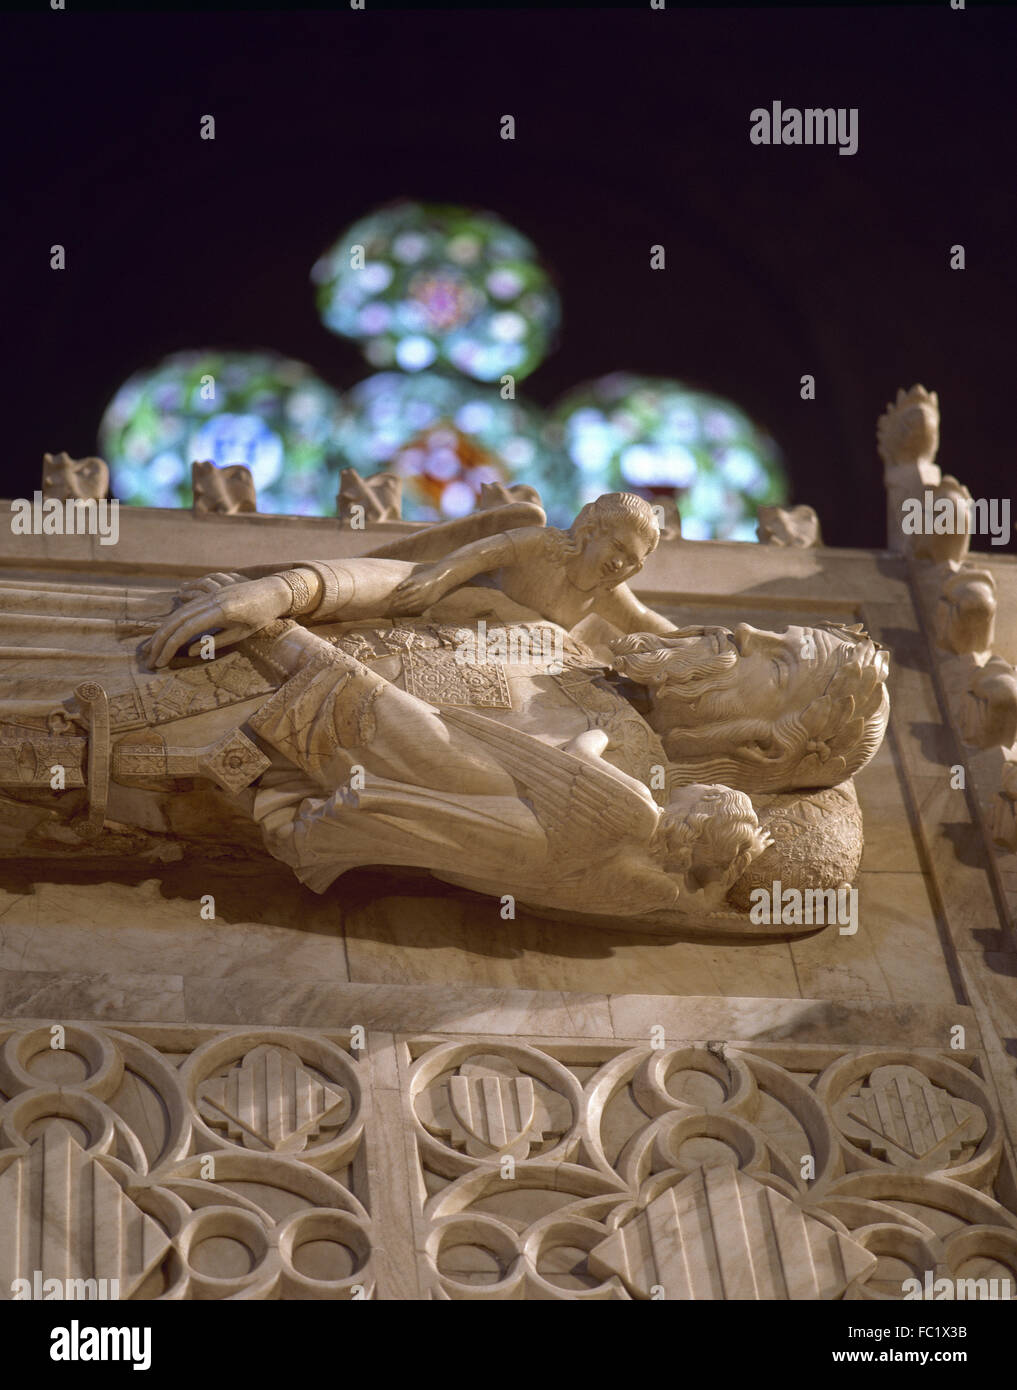 Alfonso II of Aragon called the Chaste (1154-1196). King of the Kingdom of Aragon. Tomb of Alfonso II. Royal Pantheon. Restored by Frederic Mares (1893-1991). Monastery of Poblet. Vimbodi. Catalonia. Spain. Stock Photo